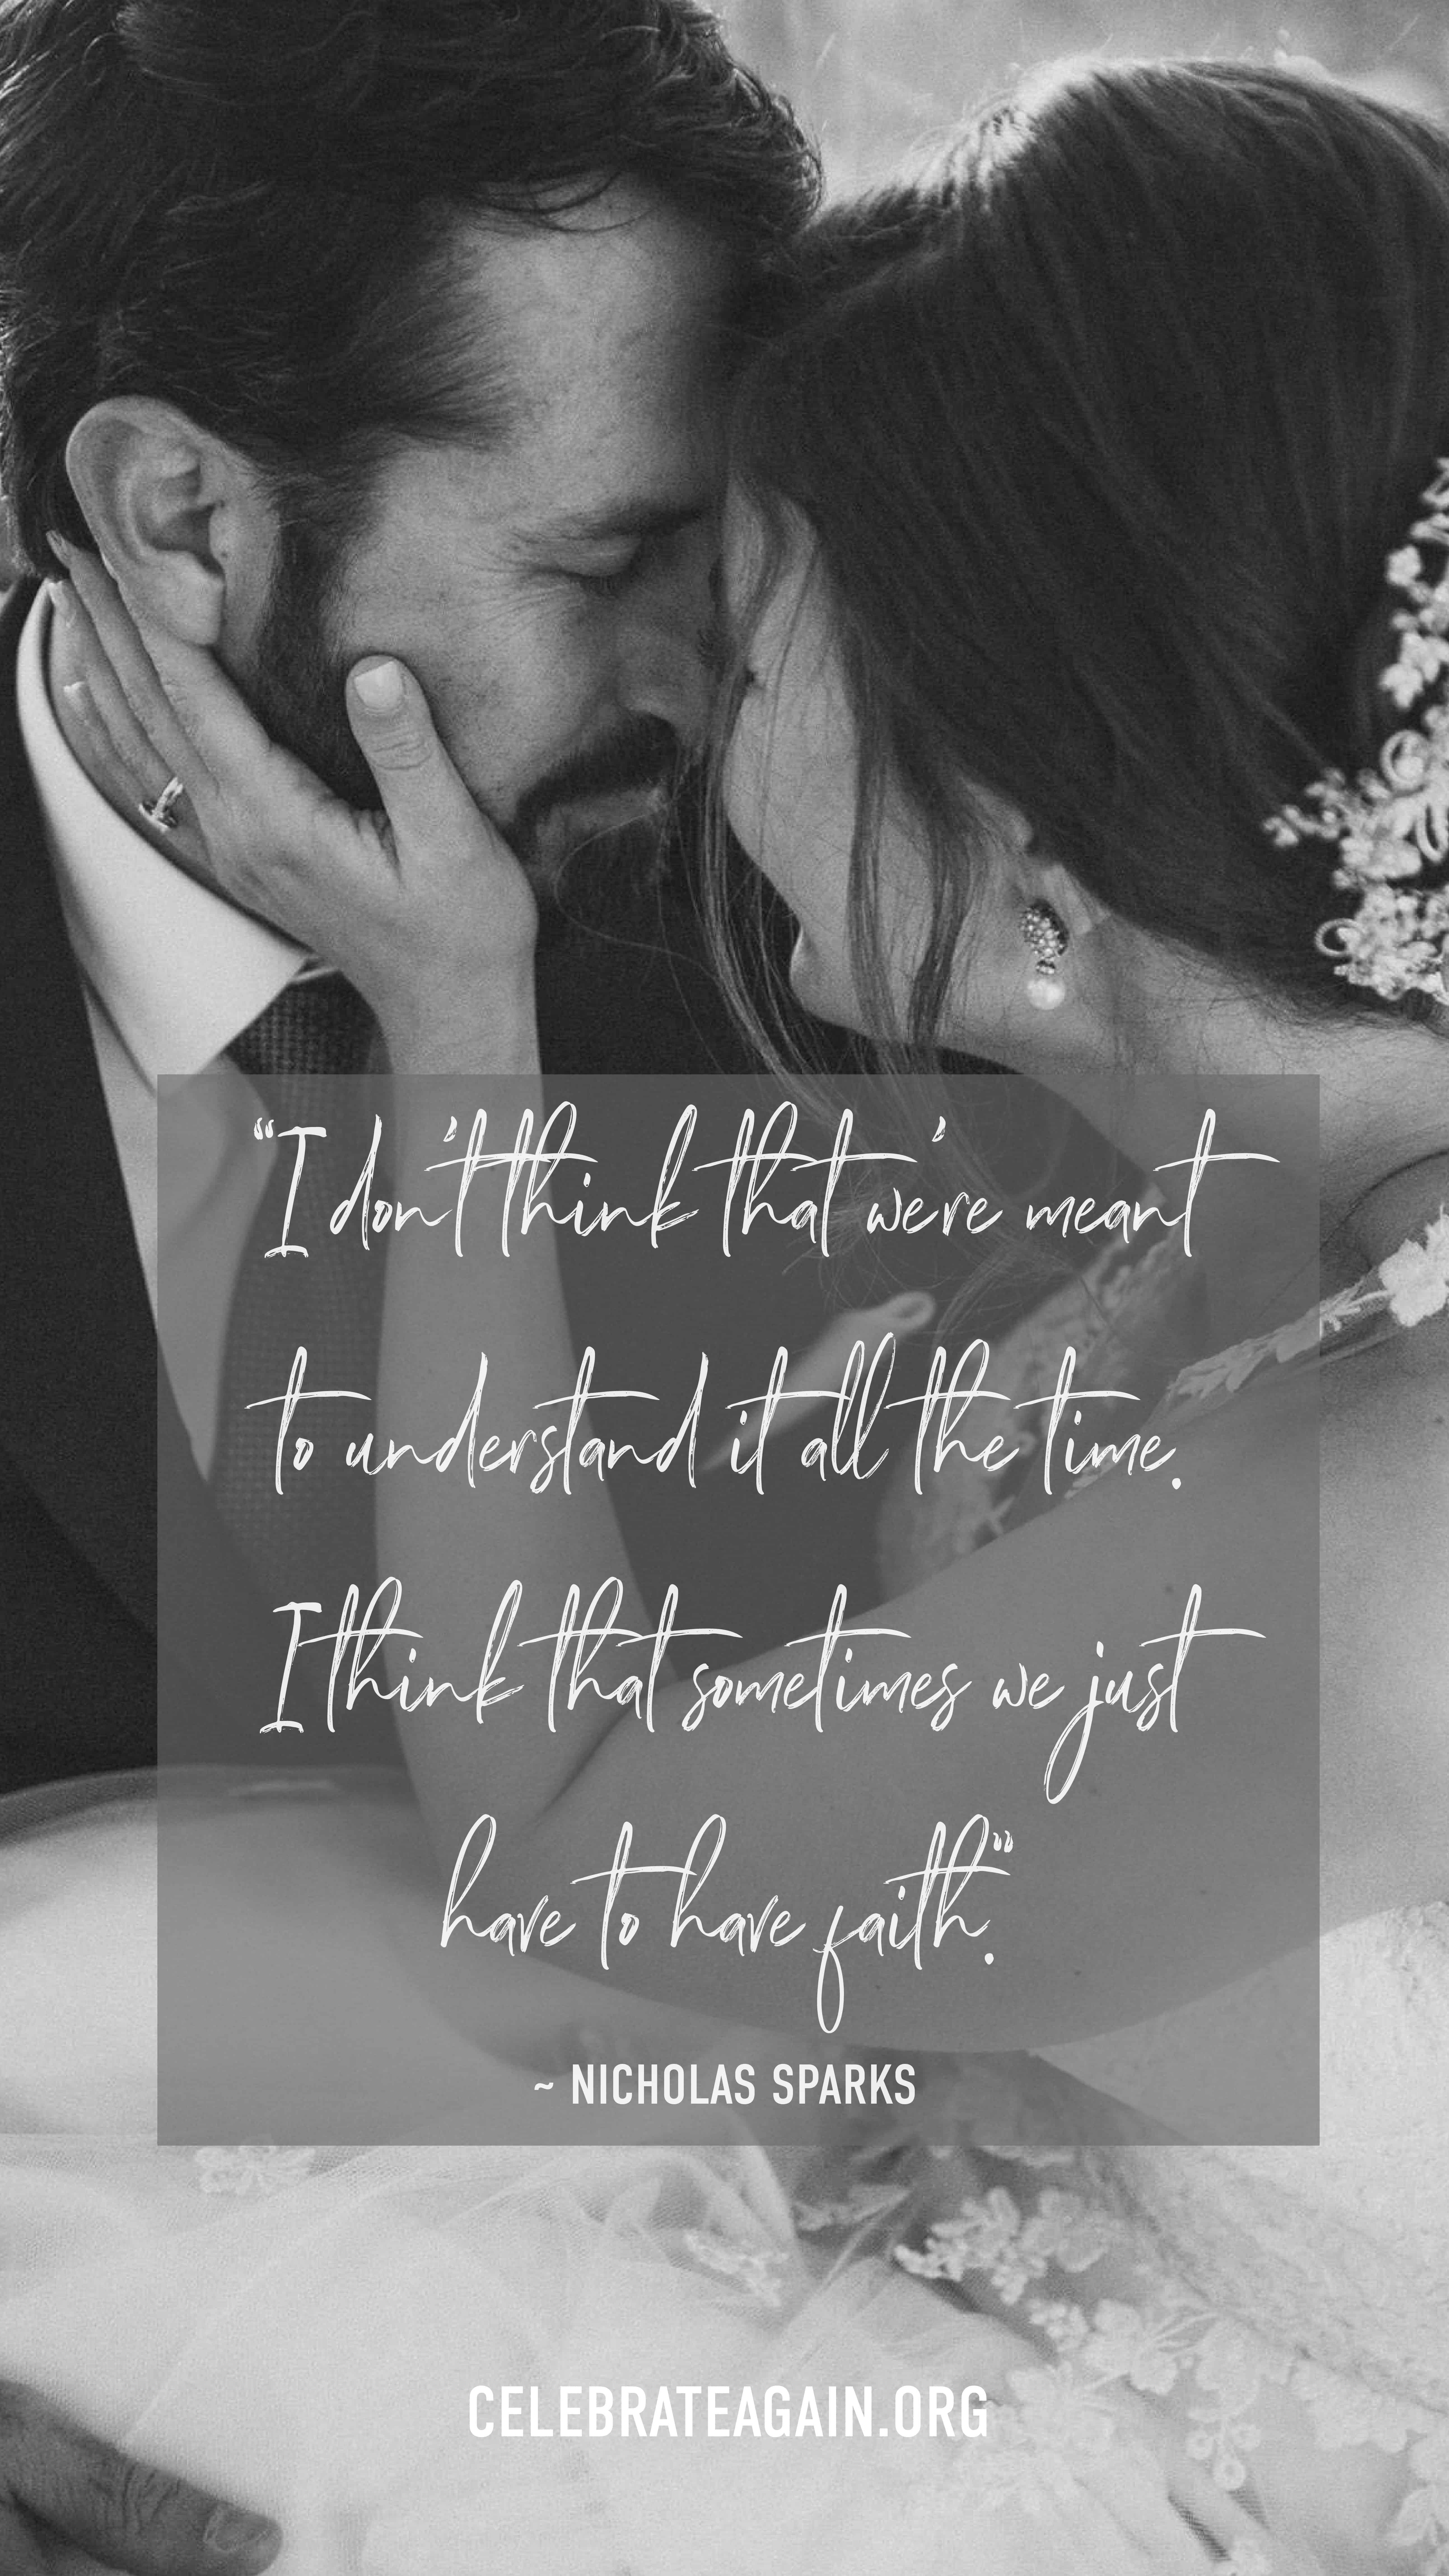 endless love quote “I don't think that we're meant to understand it all the time. I think that sometimes we just have to have faith.” ― Nicholas Sparks, A Walk to Remember image of bride holding grooms face cuddling their heads together image by celebrateagain